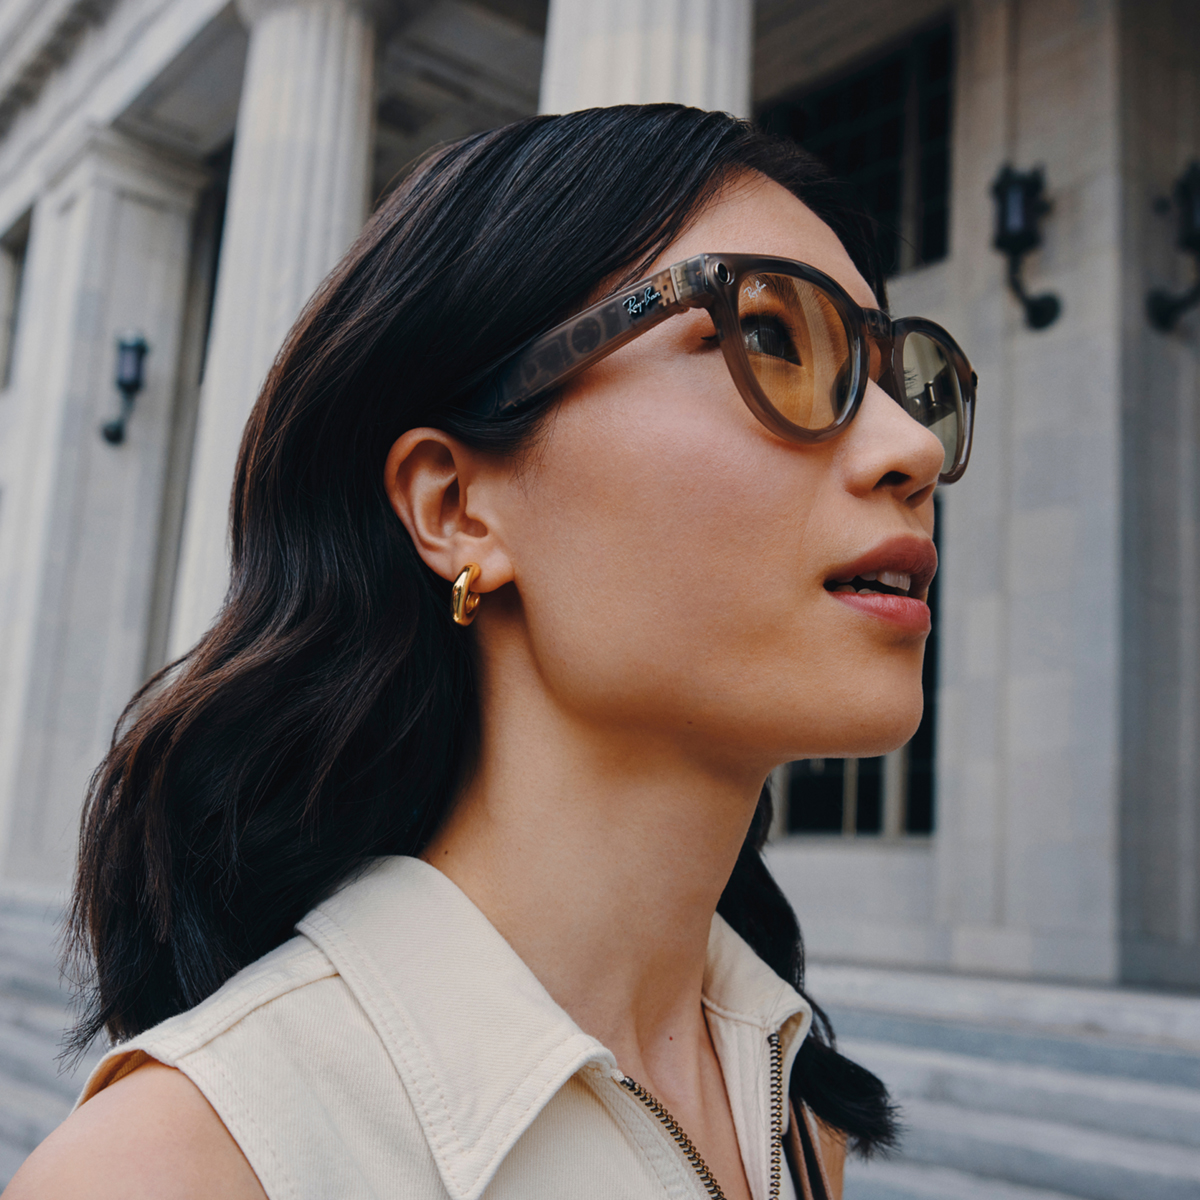 Woman wearing Ray-Ban Meta Smart Glasses in front of building.